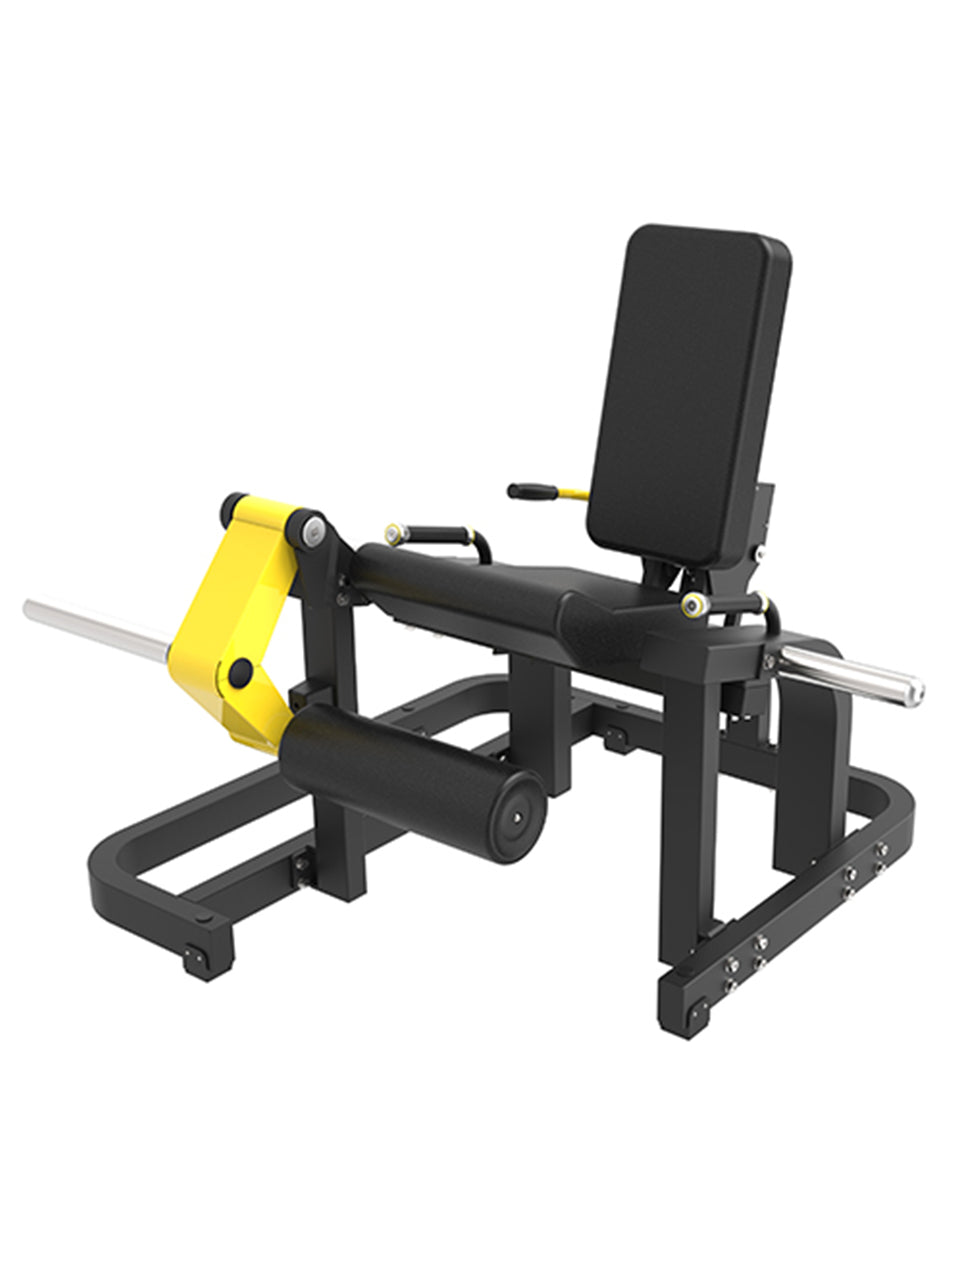 1441 Fitness Seated Leg Extension Plate Loaded